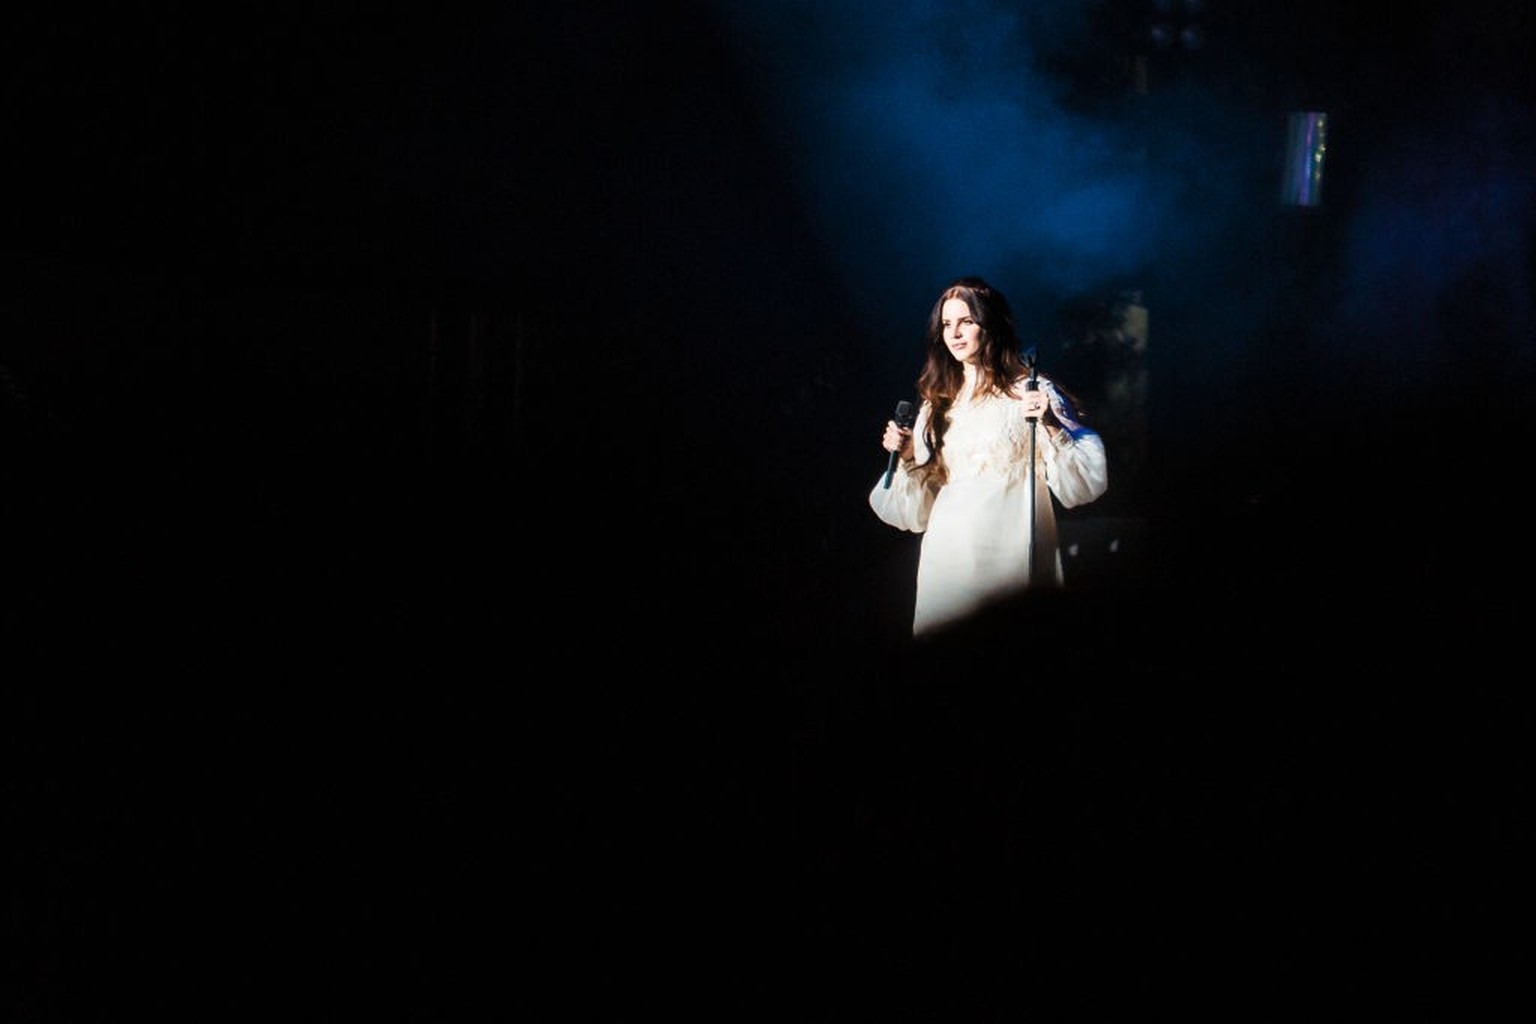 SAO PAULO, BRAZIL - NOVEMBER 11: Lana Del Rey performs live on stage at the Planeta Terra Festival 2013 on November 11, 2013 in Sao Paulo, Brazil. (Photo by Mauricio Santana/Getty Images)